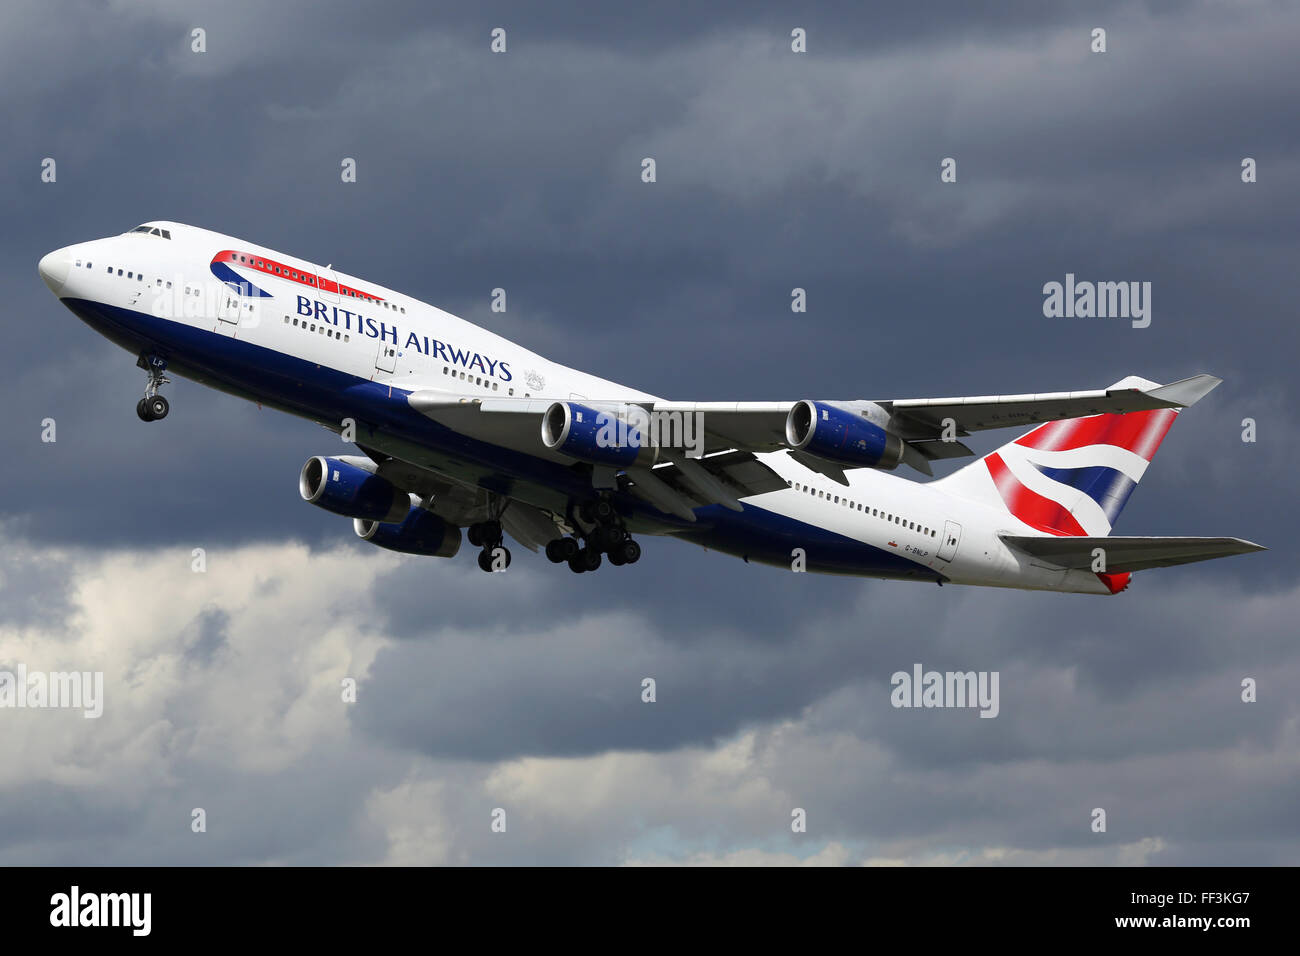 London Heathrow, United Kingdom - August 28, 2015: A British Airways Boeing 747 with the registration G-BNLP taking off from Lon Stock Photo